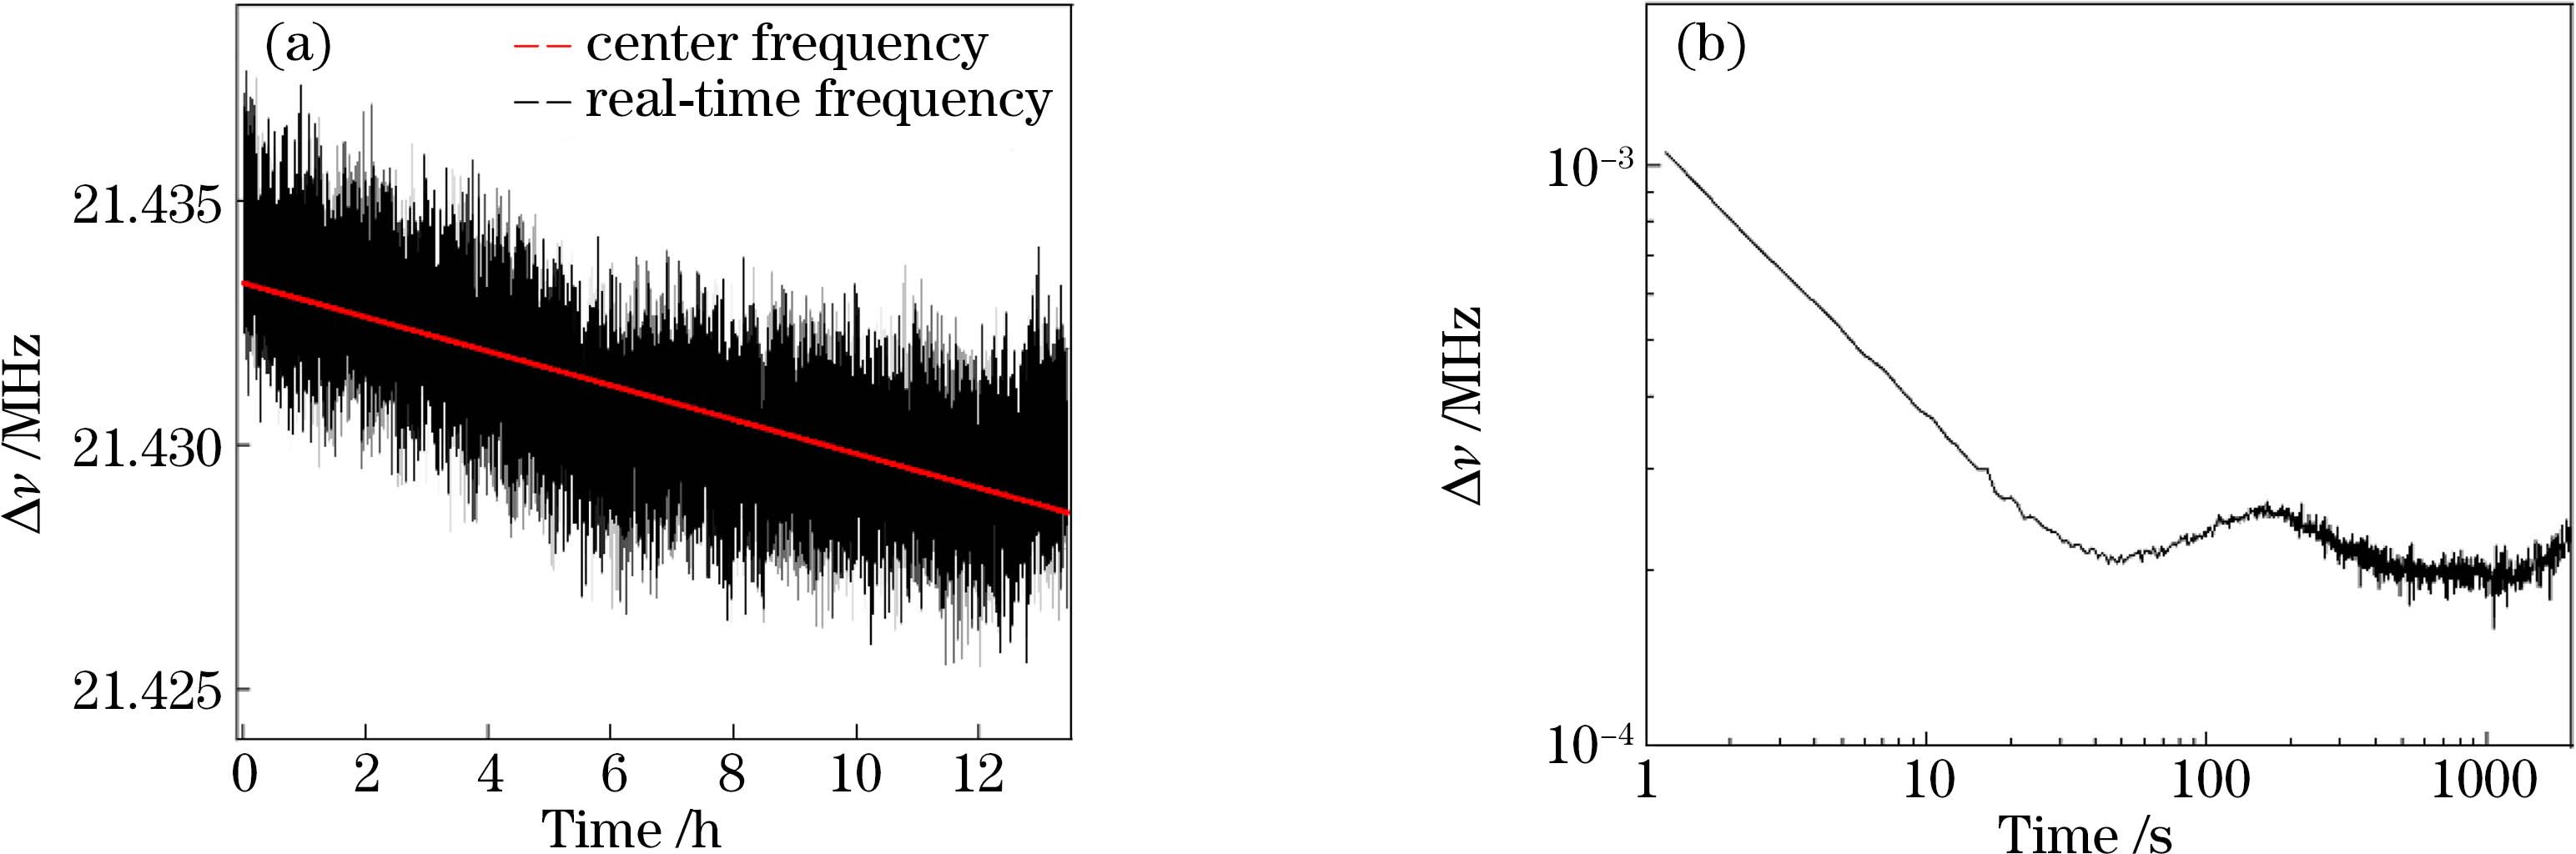 Test results of laser frequency uncertainty. (a) Variation of beat frequency with time; (b) evaluation result of Allan deviation